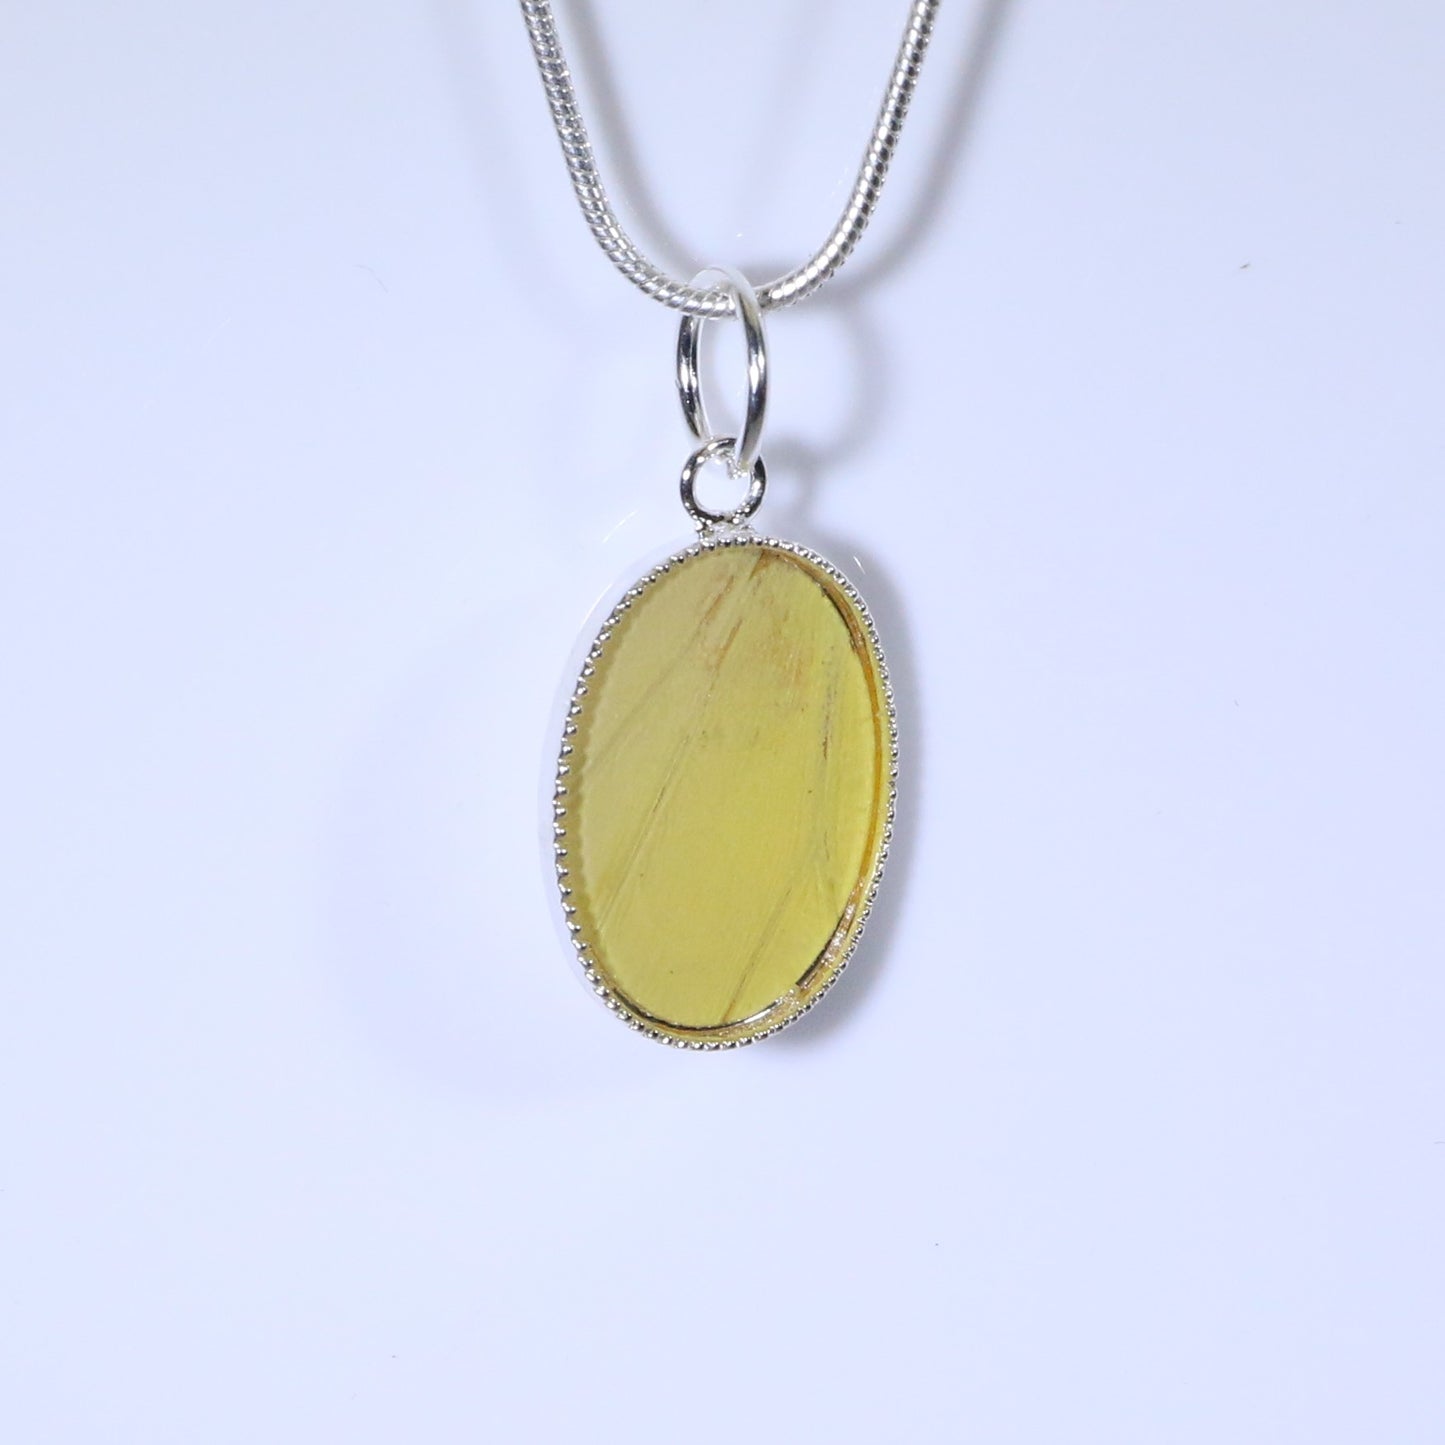 52106 - Real Butterfly Wing Jewelry - Pendant - Small - Hebomia - Yellow